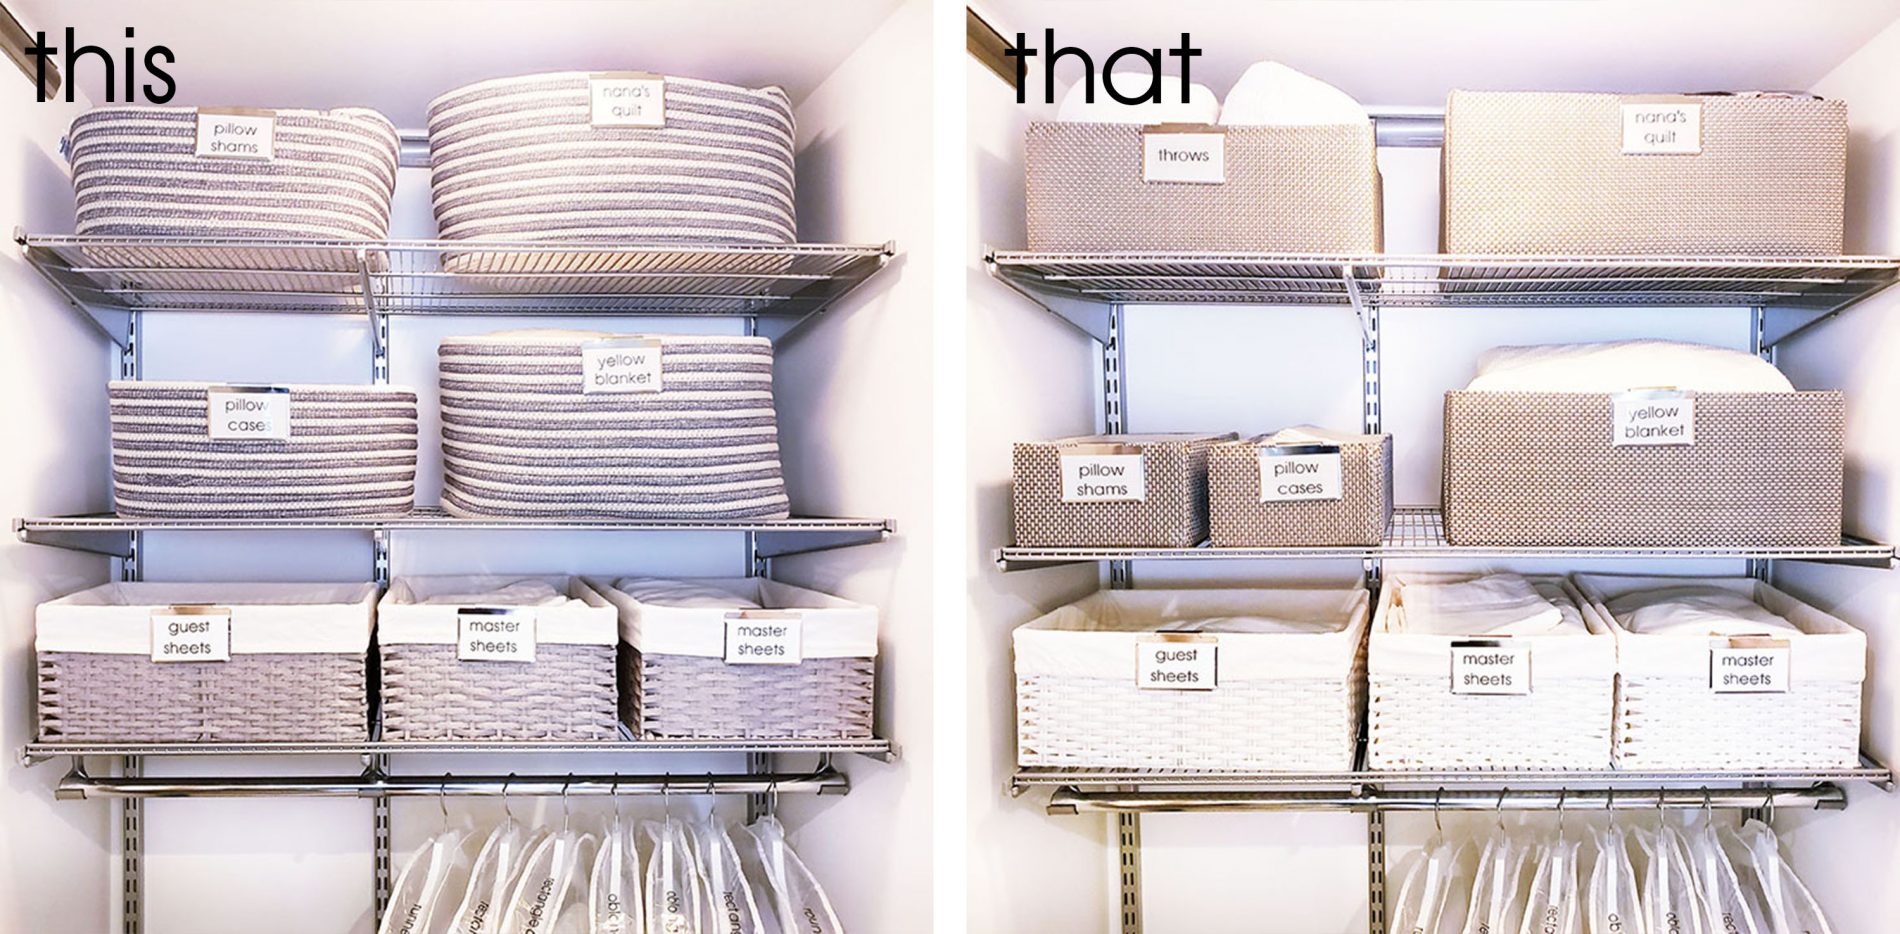 Two pictures of a linen closet with white baskets to help organize your linen closet.